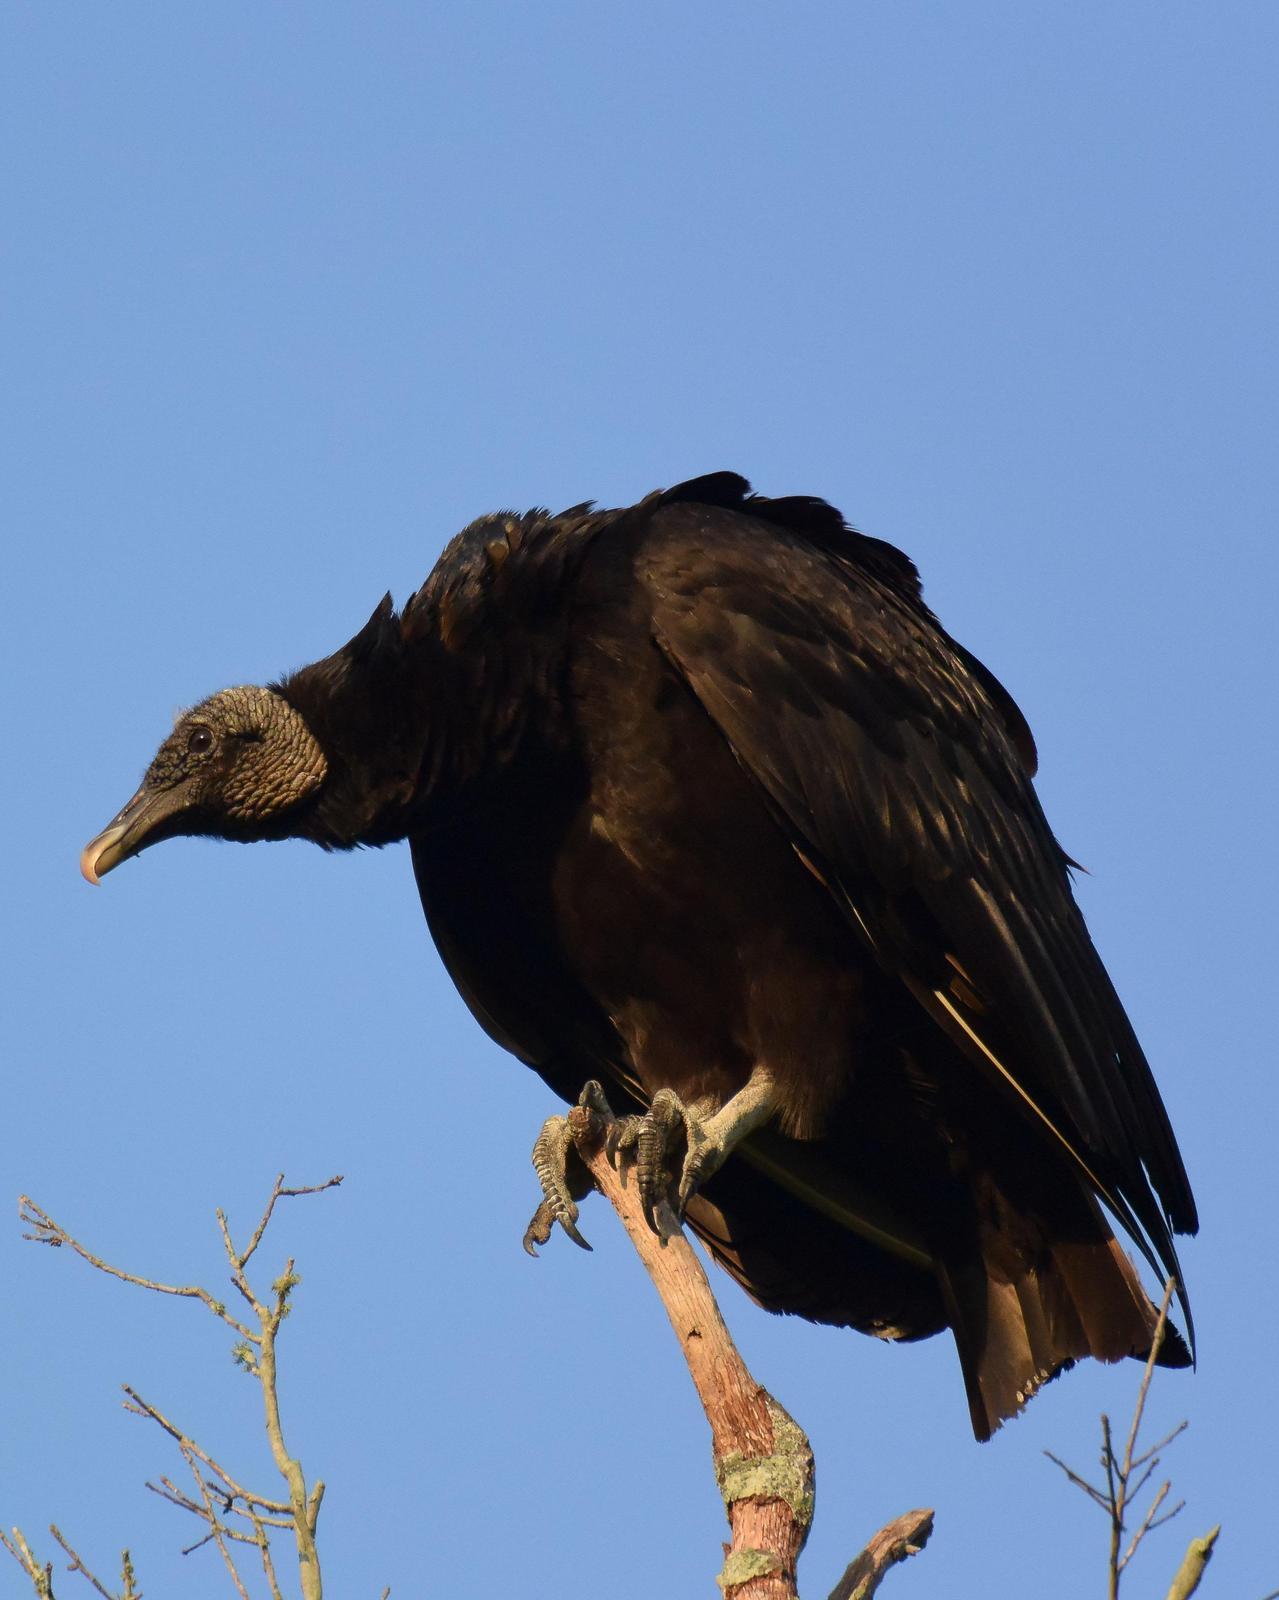 Black Vulture Photo by Emily Percival